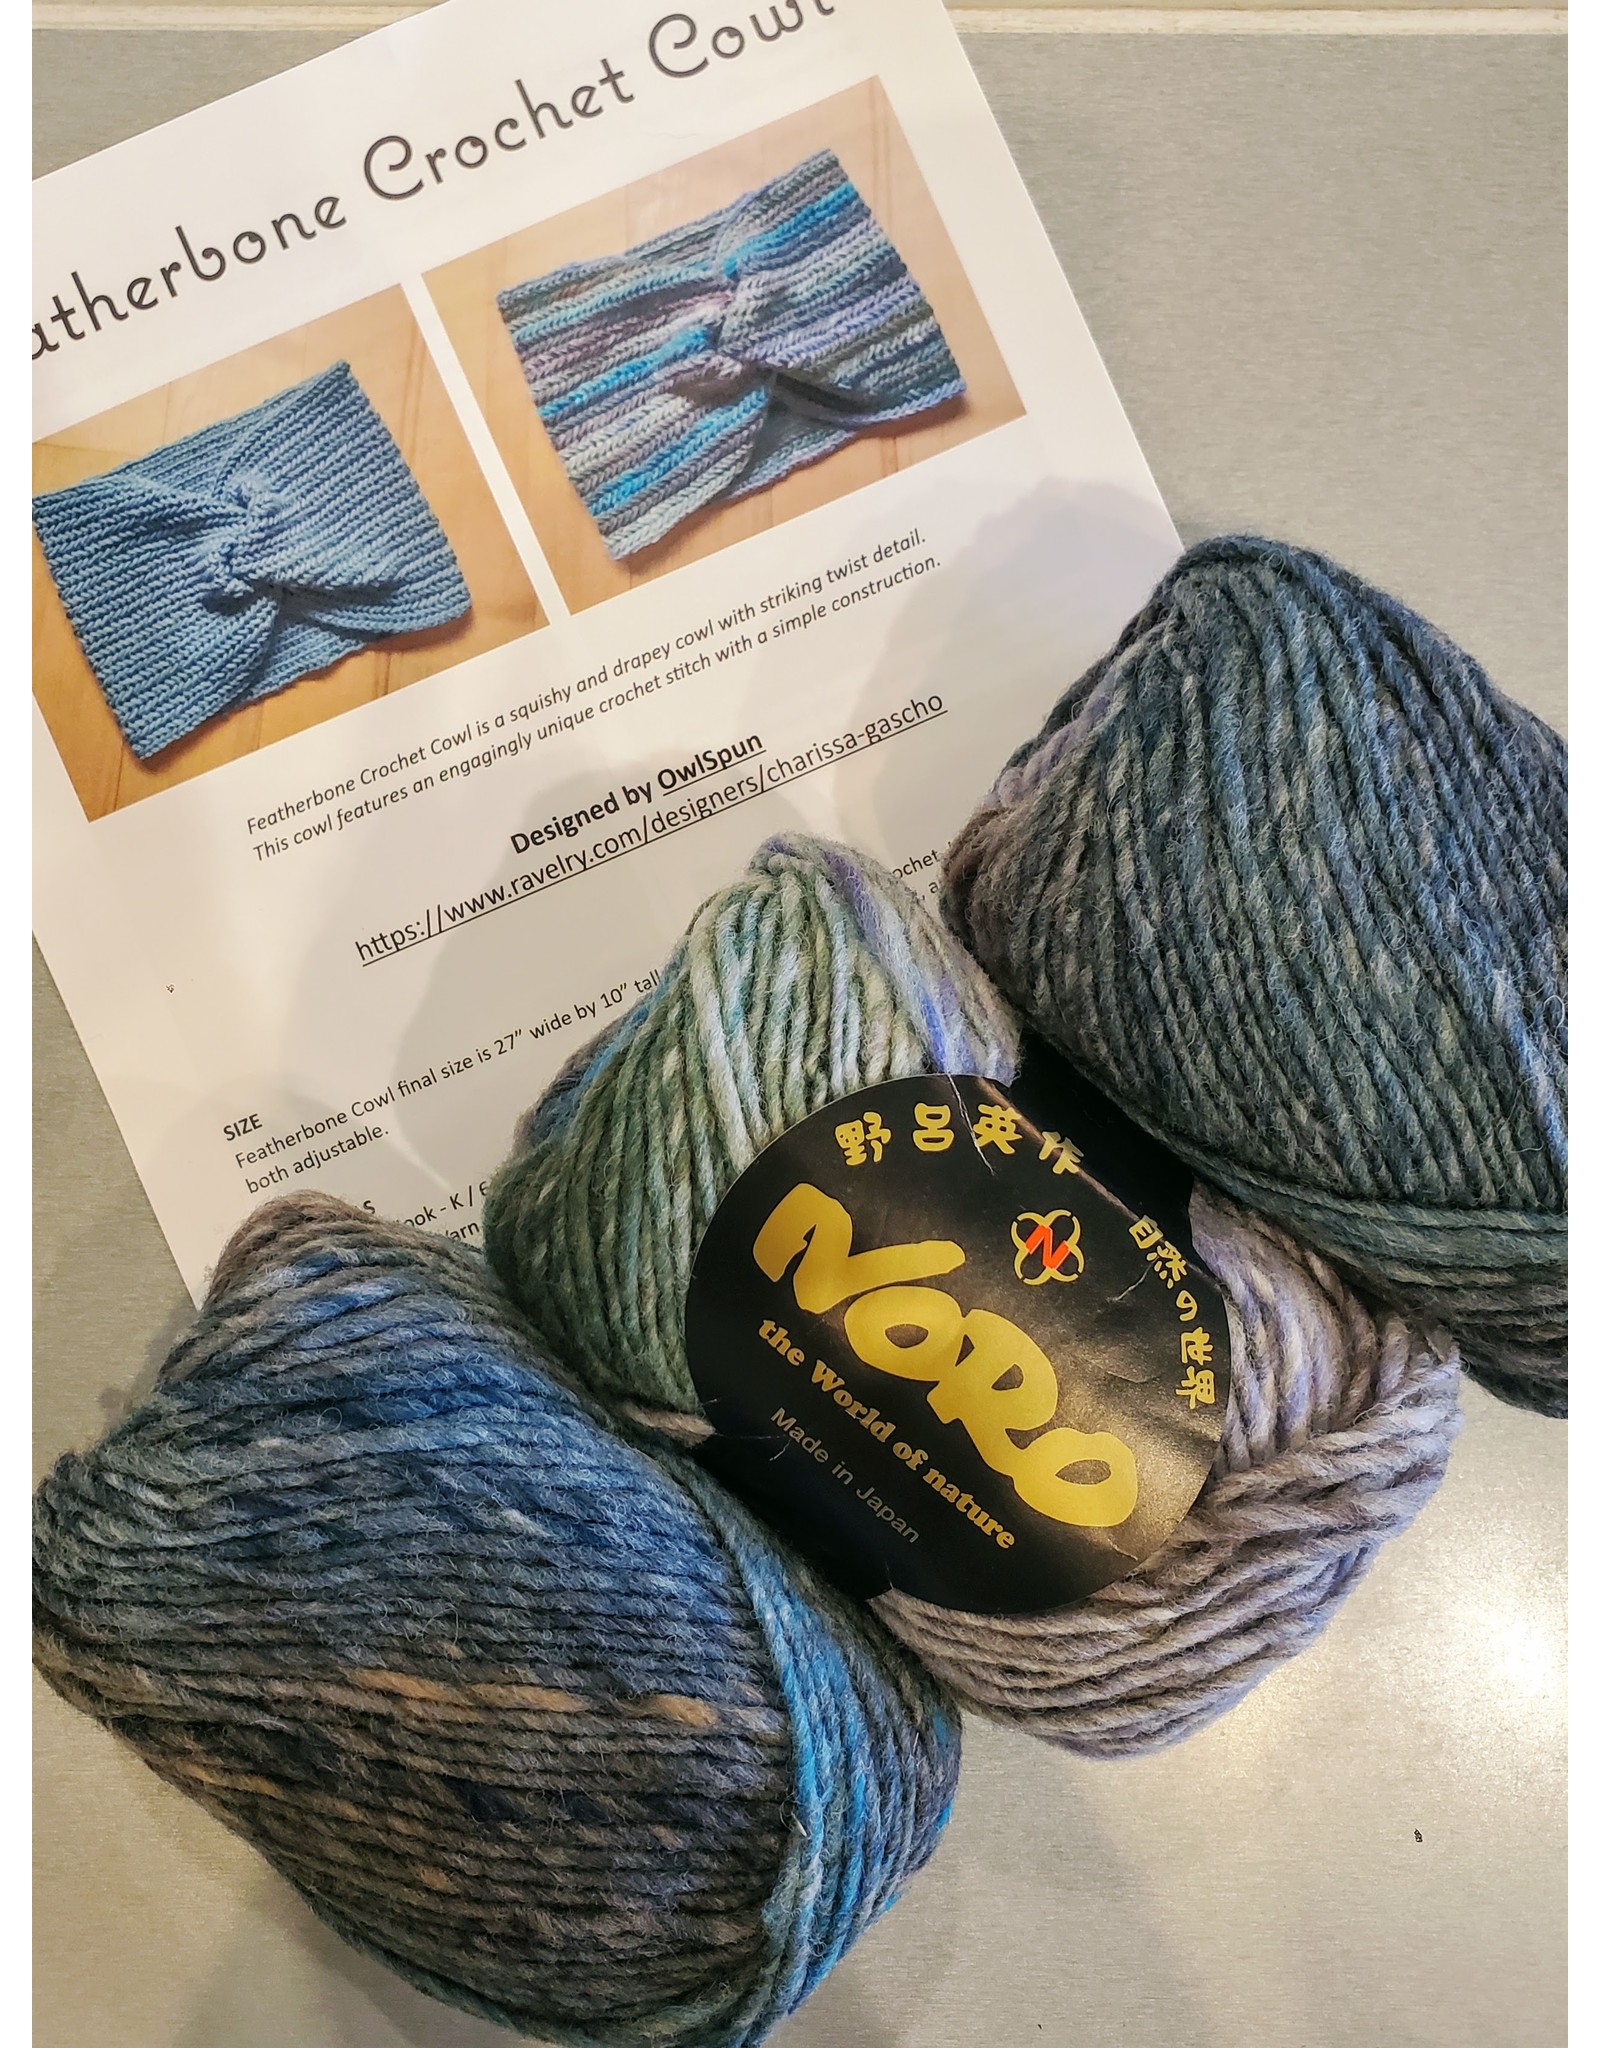 Stranded by the Sea Owl Spun Featherbone Crochet Cowl Kit Noro